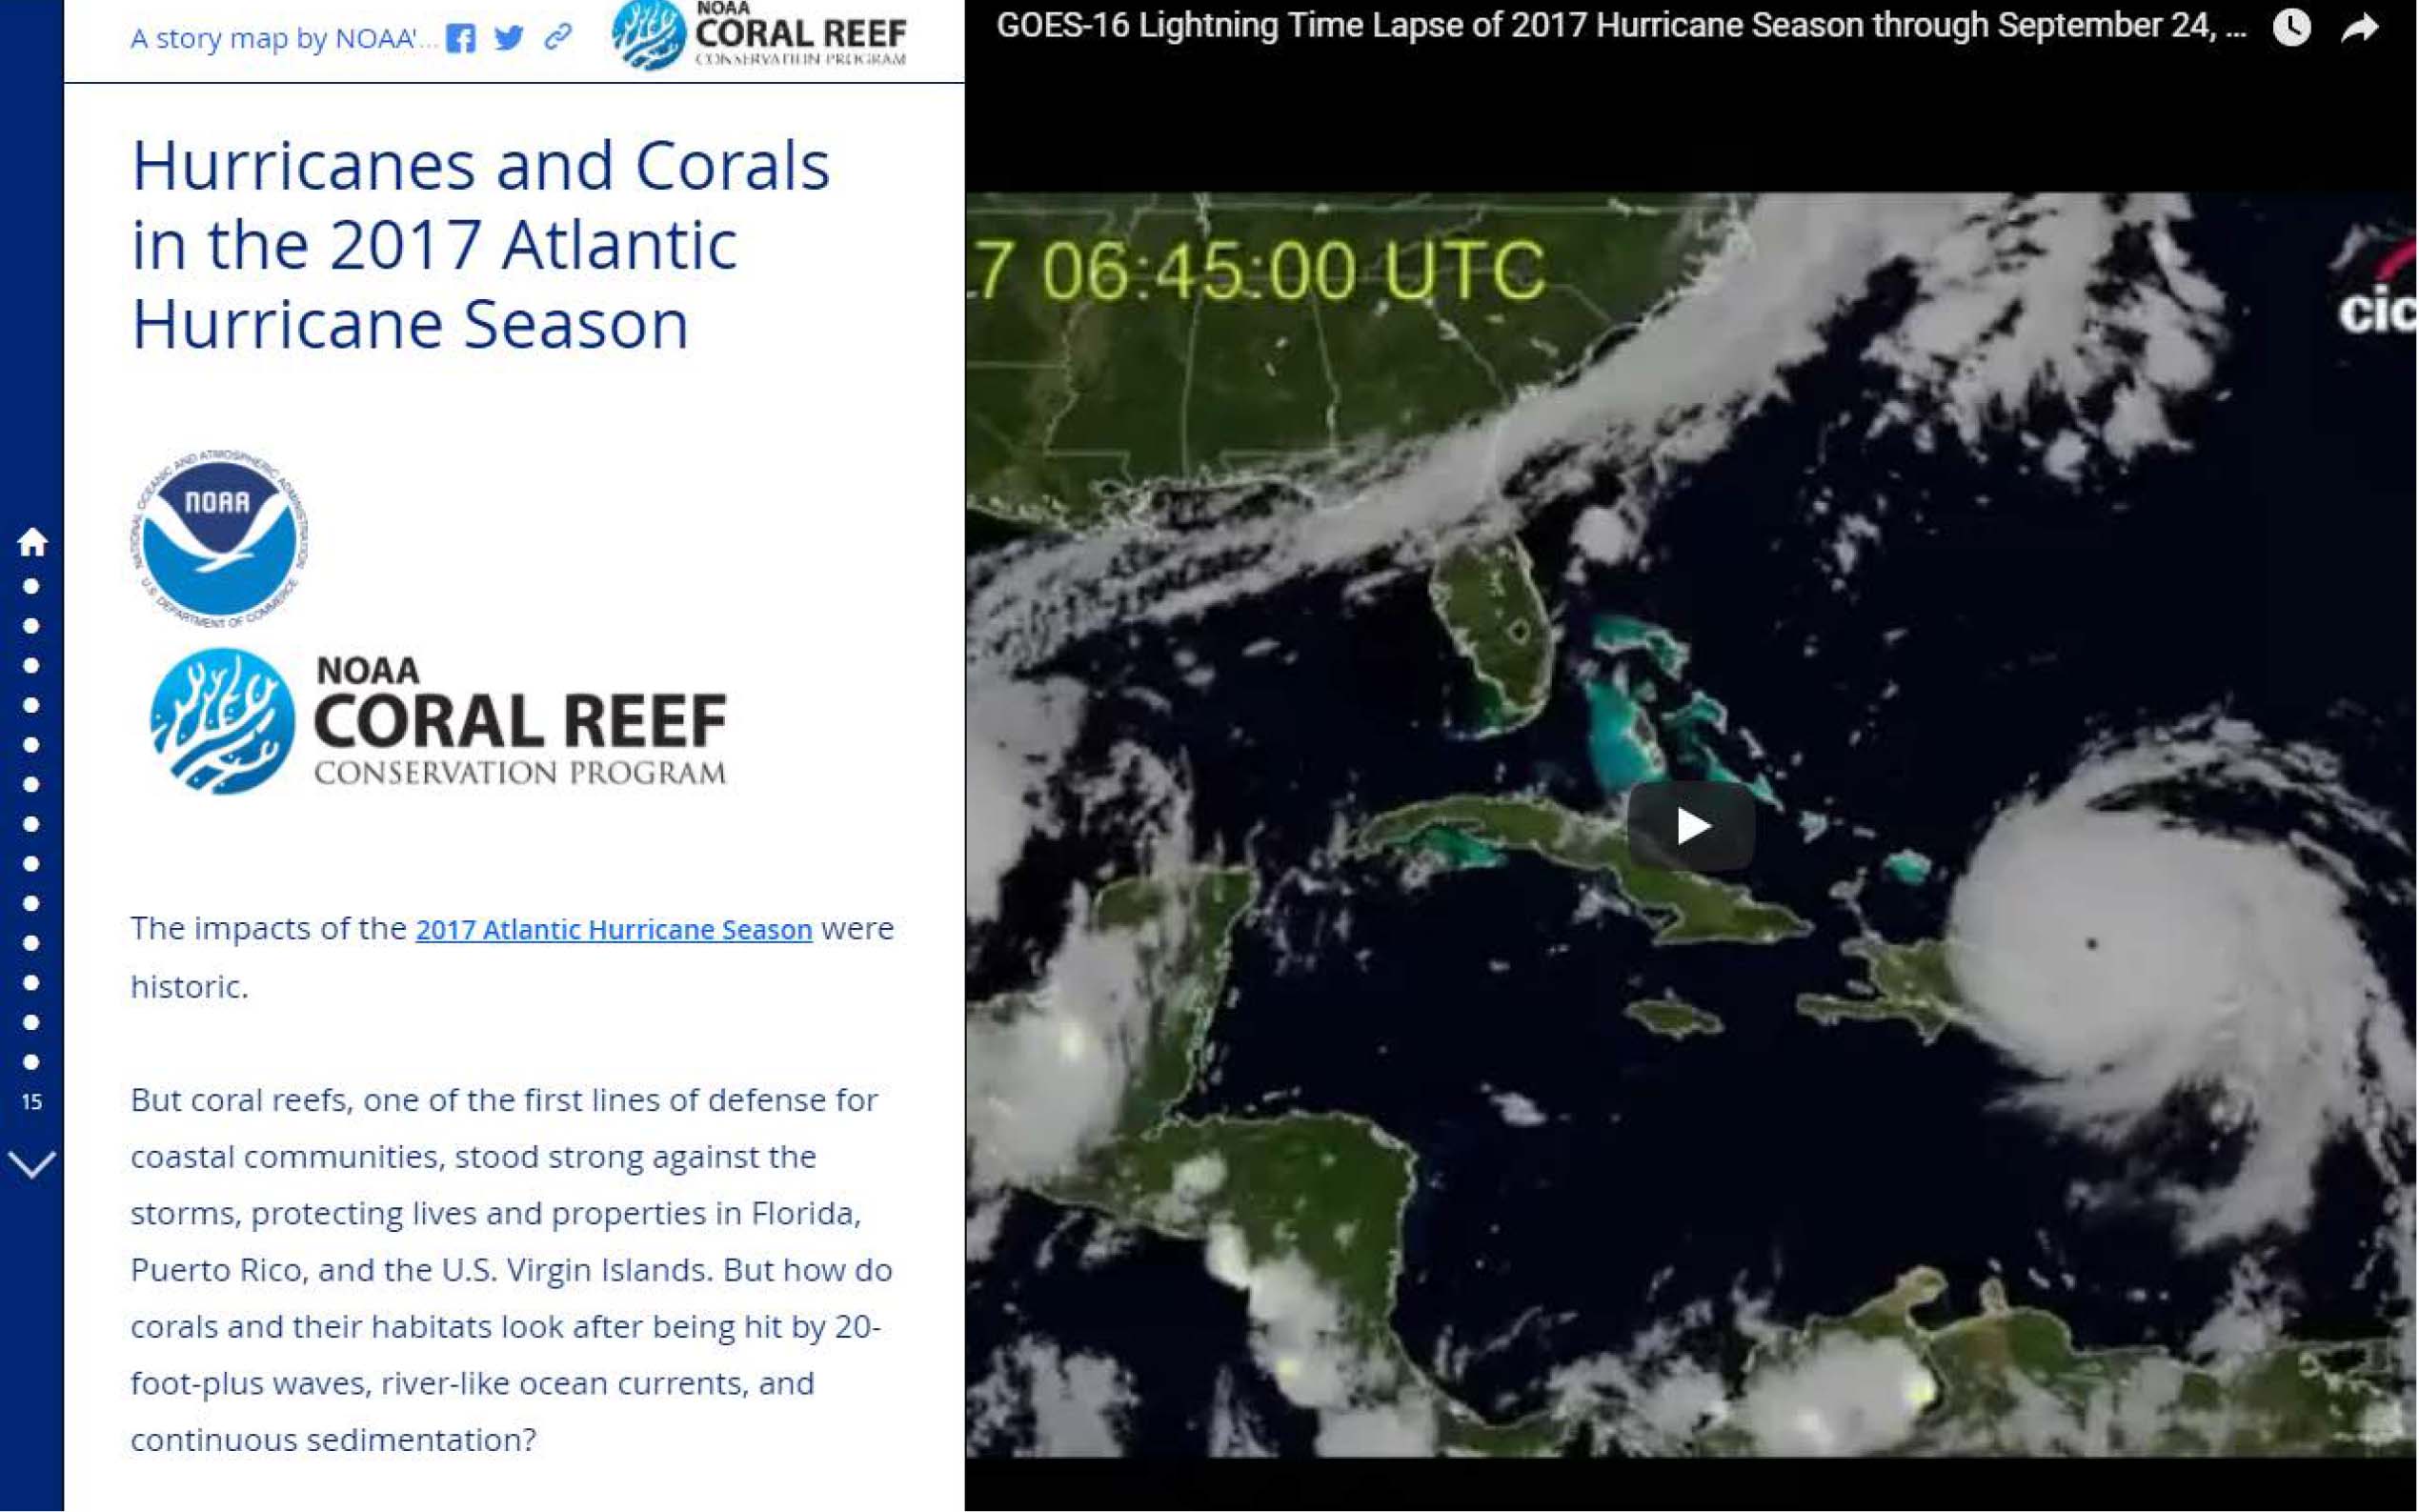 screen shot of the story map for ARCGIS application of damage to coral reef area from the 2017 hurricane season